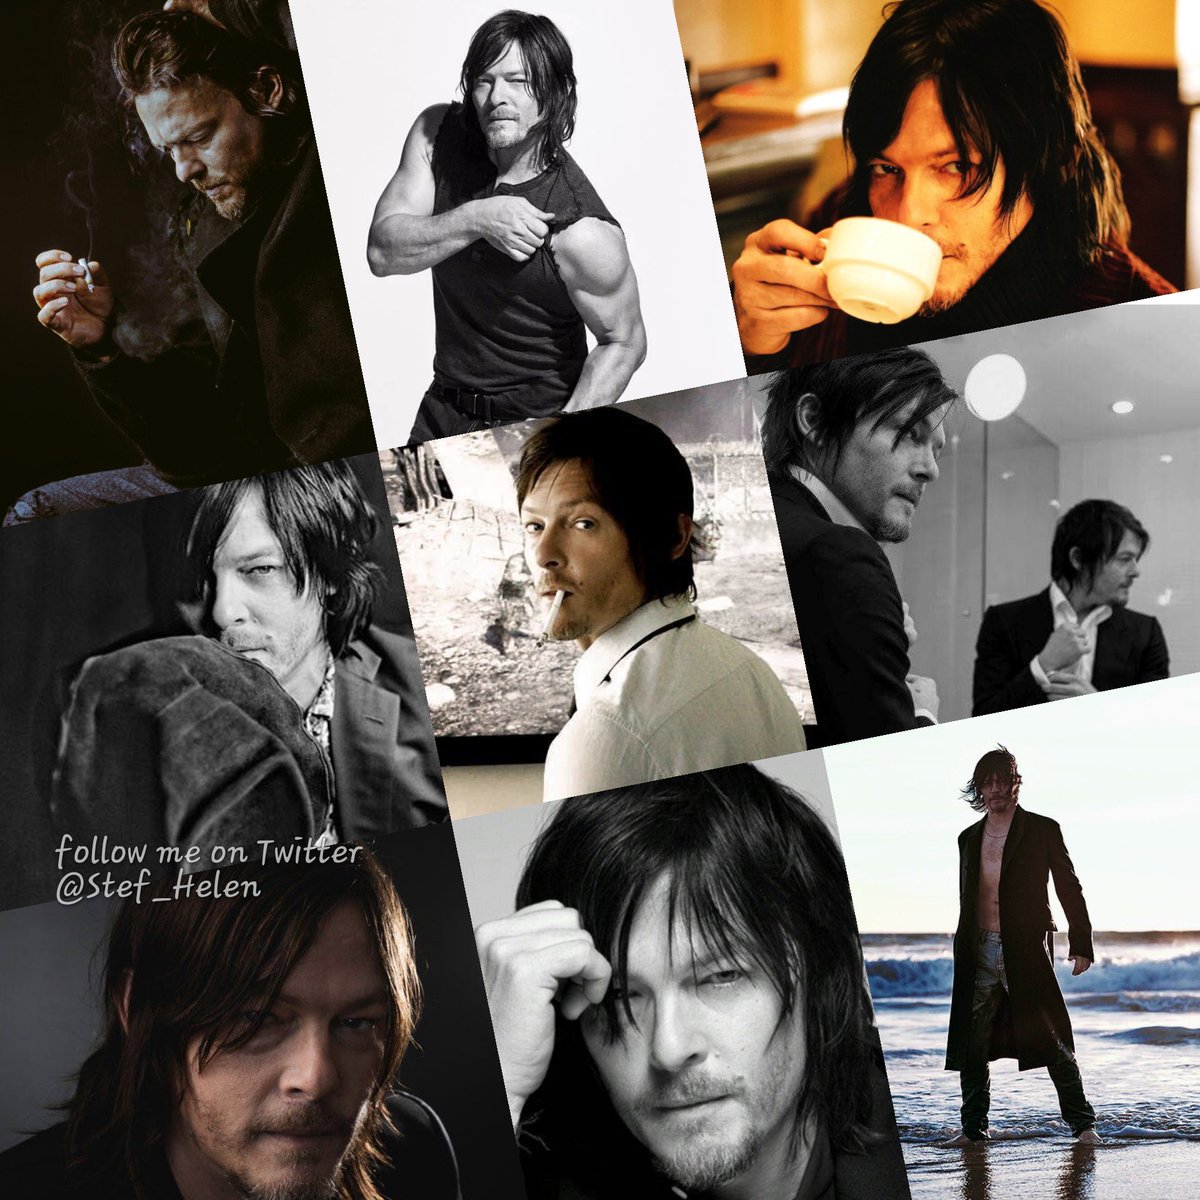  #StayHome    #staysafe, as hard as it is. Use phones or the internet to stay in contact with loved ones. We have to  #StayStrong and be sensible. A little Norman to brighten up the day  #TWDFamily    @wwwbigbaldhead  @stitchwitch76  @HeyMo517  @noevalcolombo  @JeffBlueWave1  @smoking_reedus